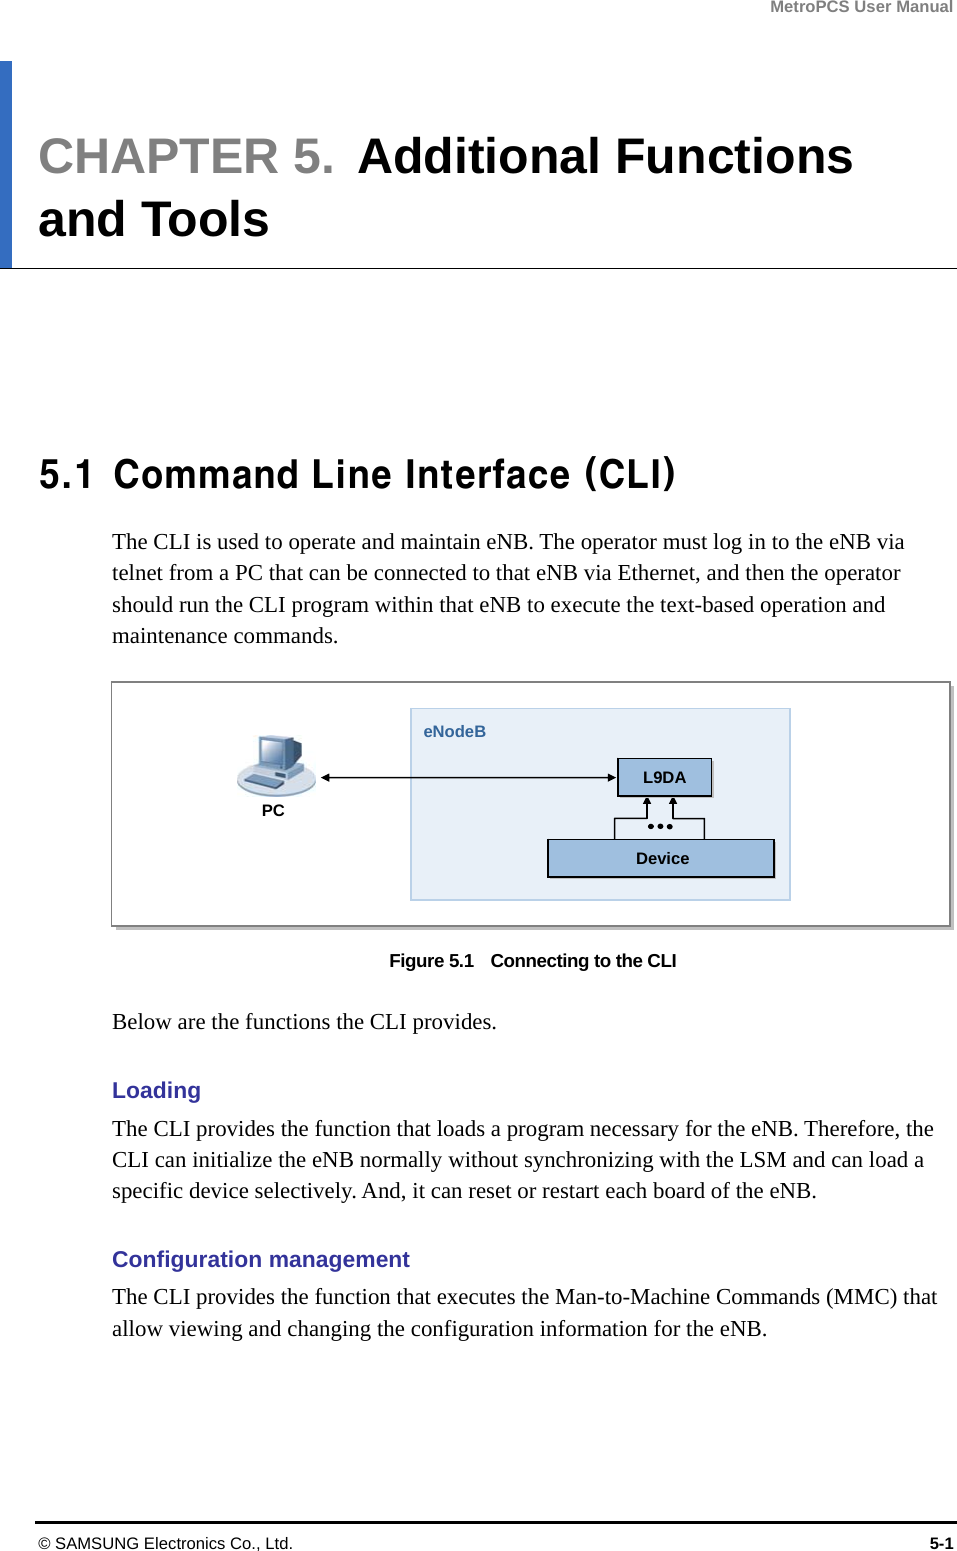 MetroPCS User Manual © SAMSUNG Electronics Co., Ltd.  5-1 CHAPTER 5.  Additional Functions and Tools      5.1  Command Line Interface (CLI) The CLI is used to operate and maintain eNB. The operator must log in to the eNB via telnet from a PC that can be connected to that eNB via Ethernet, and then the operator should run the CLI program within that eNB to execute the text-based operation and maintenance commands.  Figure 5.1    Connecting to the CLI  Below are the functions the CLI provides.  Loading The CLI provides the function that loads a program necessary for the eNB. Therefore, the CLI can initialize the eNB normally without synchronizing with the LSM and can load a specific device selectively. And, it can reset or restart each board of the eNB.  Configuration management The CLI provides the function that executes the Man-to-Machine Commands (MMC) that allow viewing and changing the configuration information for the eNB.  PC eNodeBDevice L9DA 